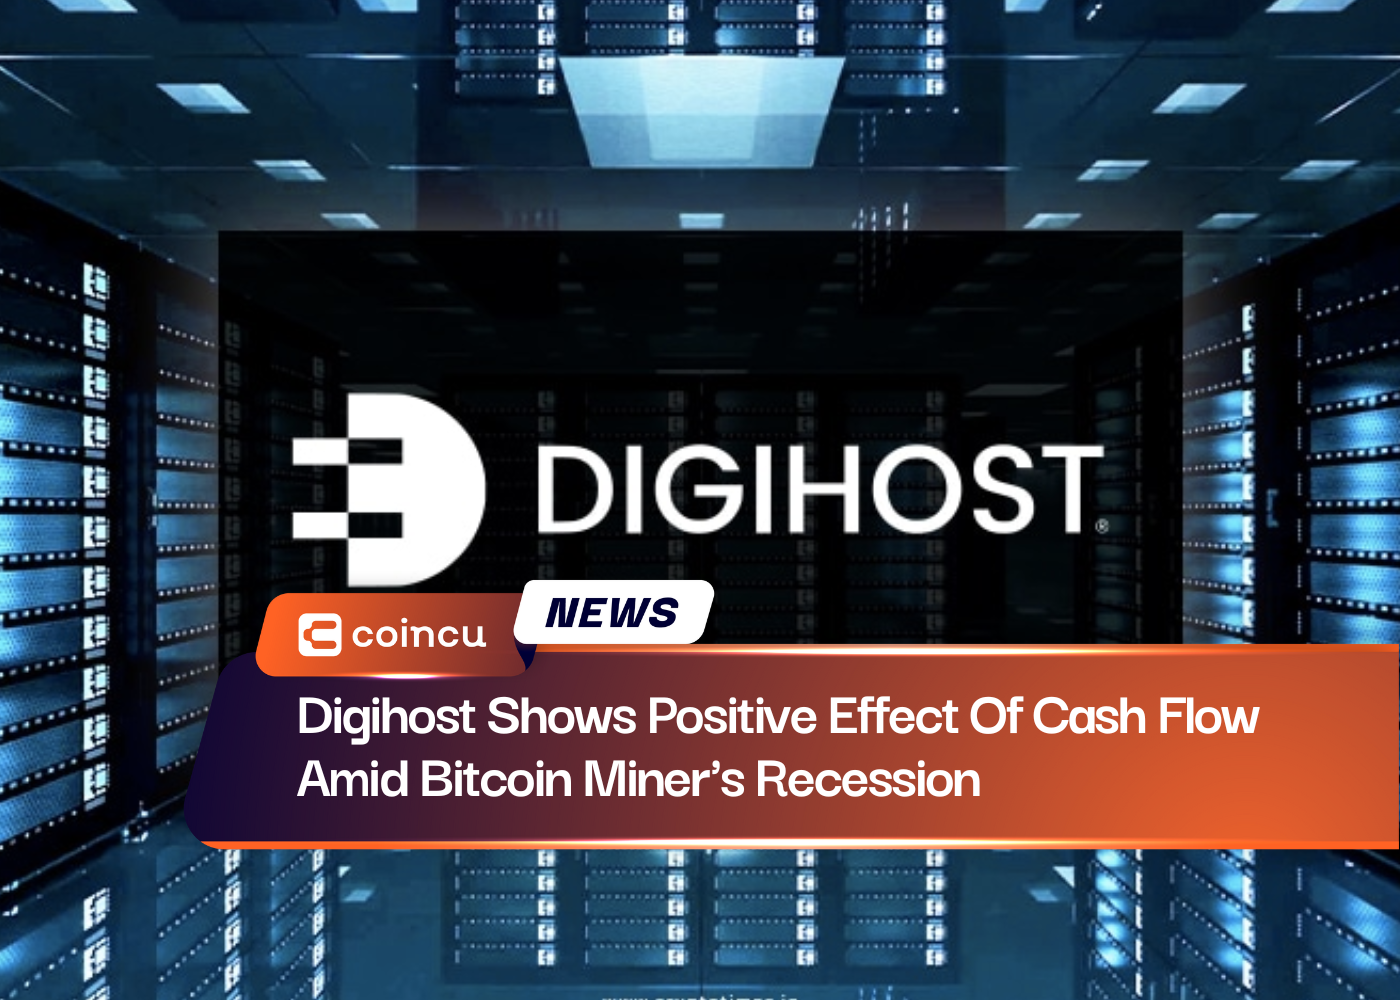 Digihost Shows Positive Effect Of Cash Flow Amid Bitcoin Miner's Recession